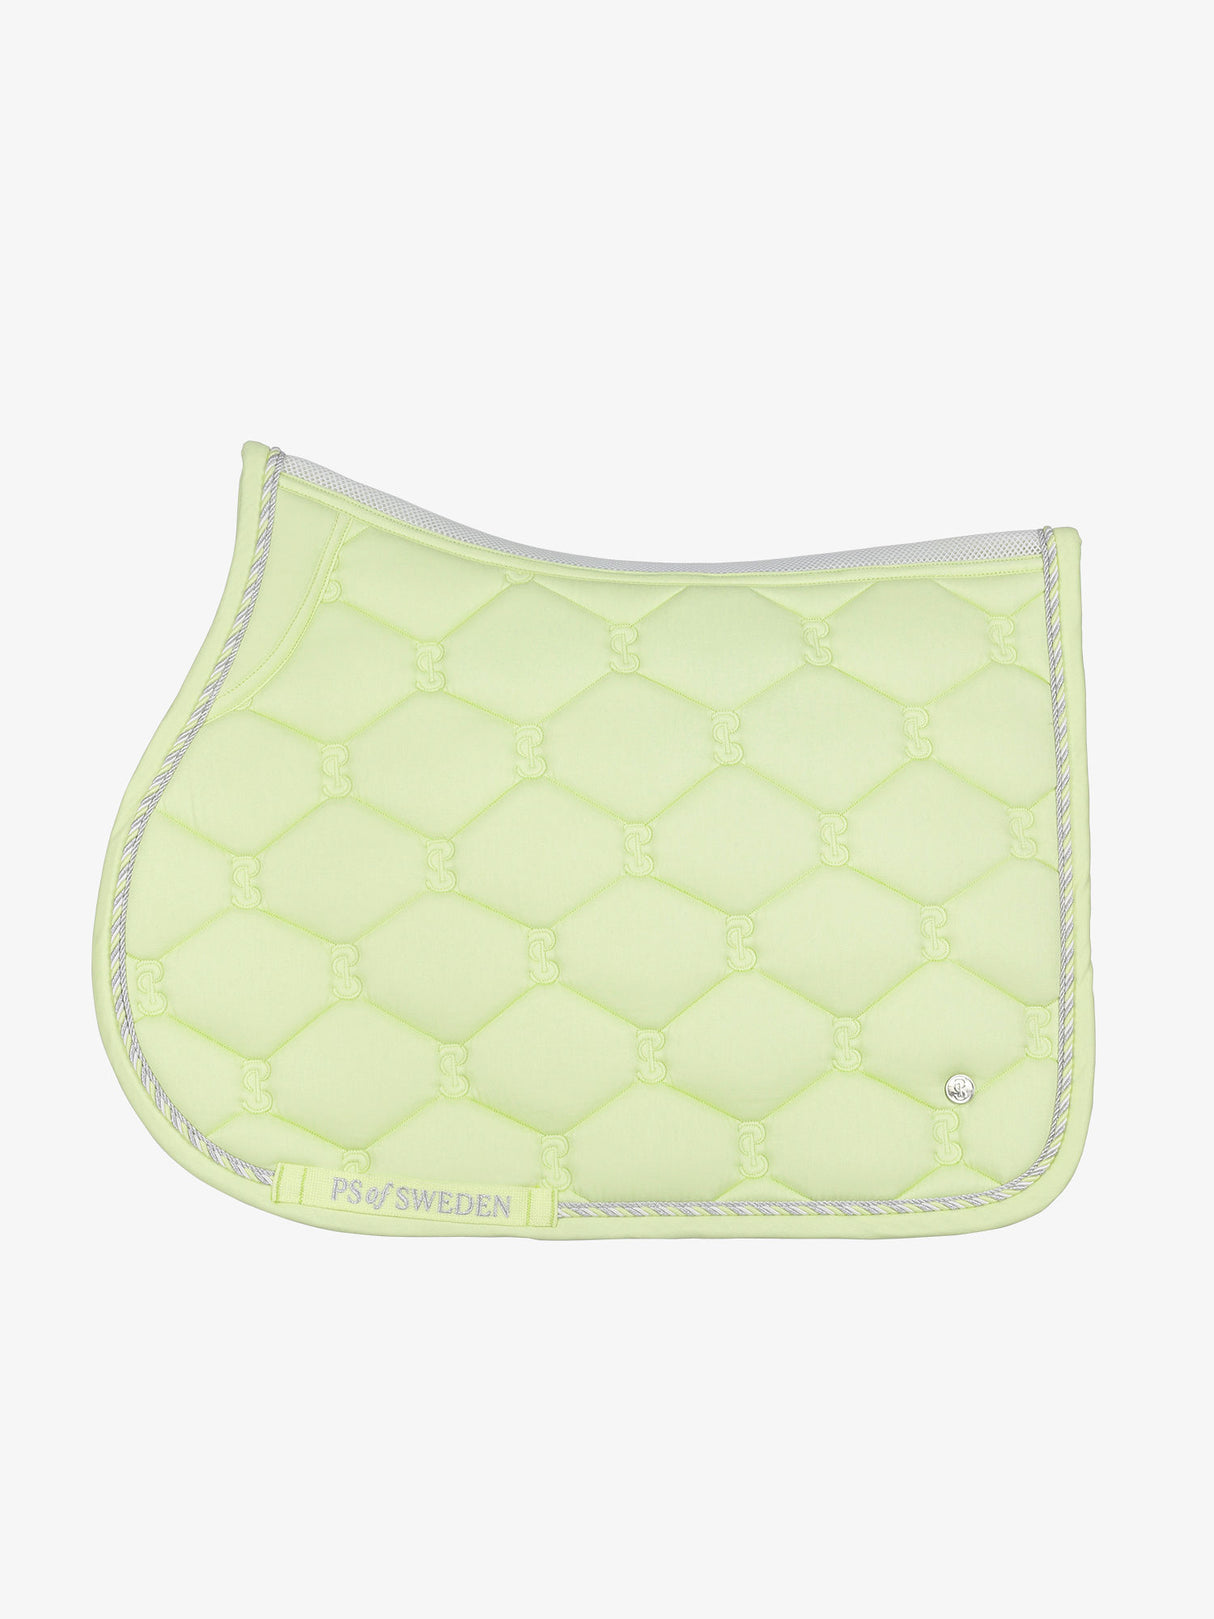 PS of Sweden Classic Jump Saddle Pad Seed Green